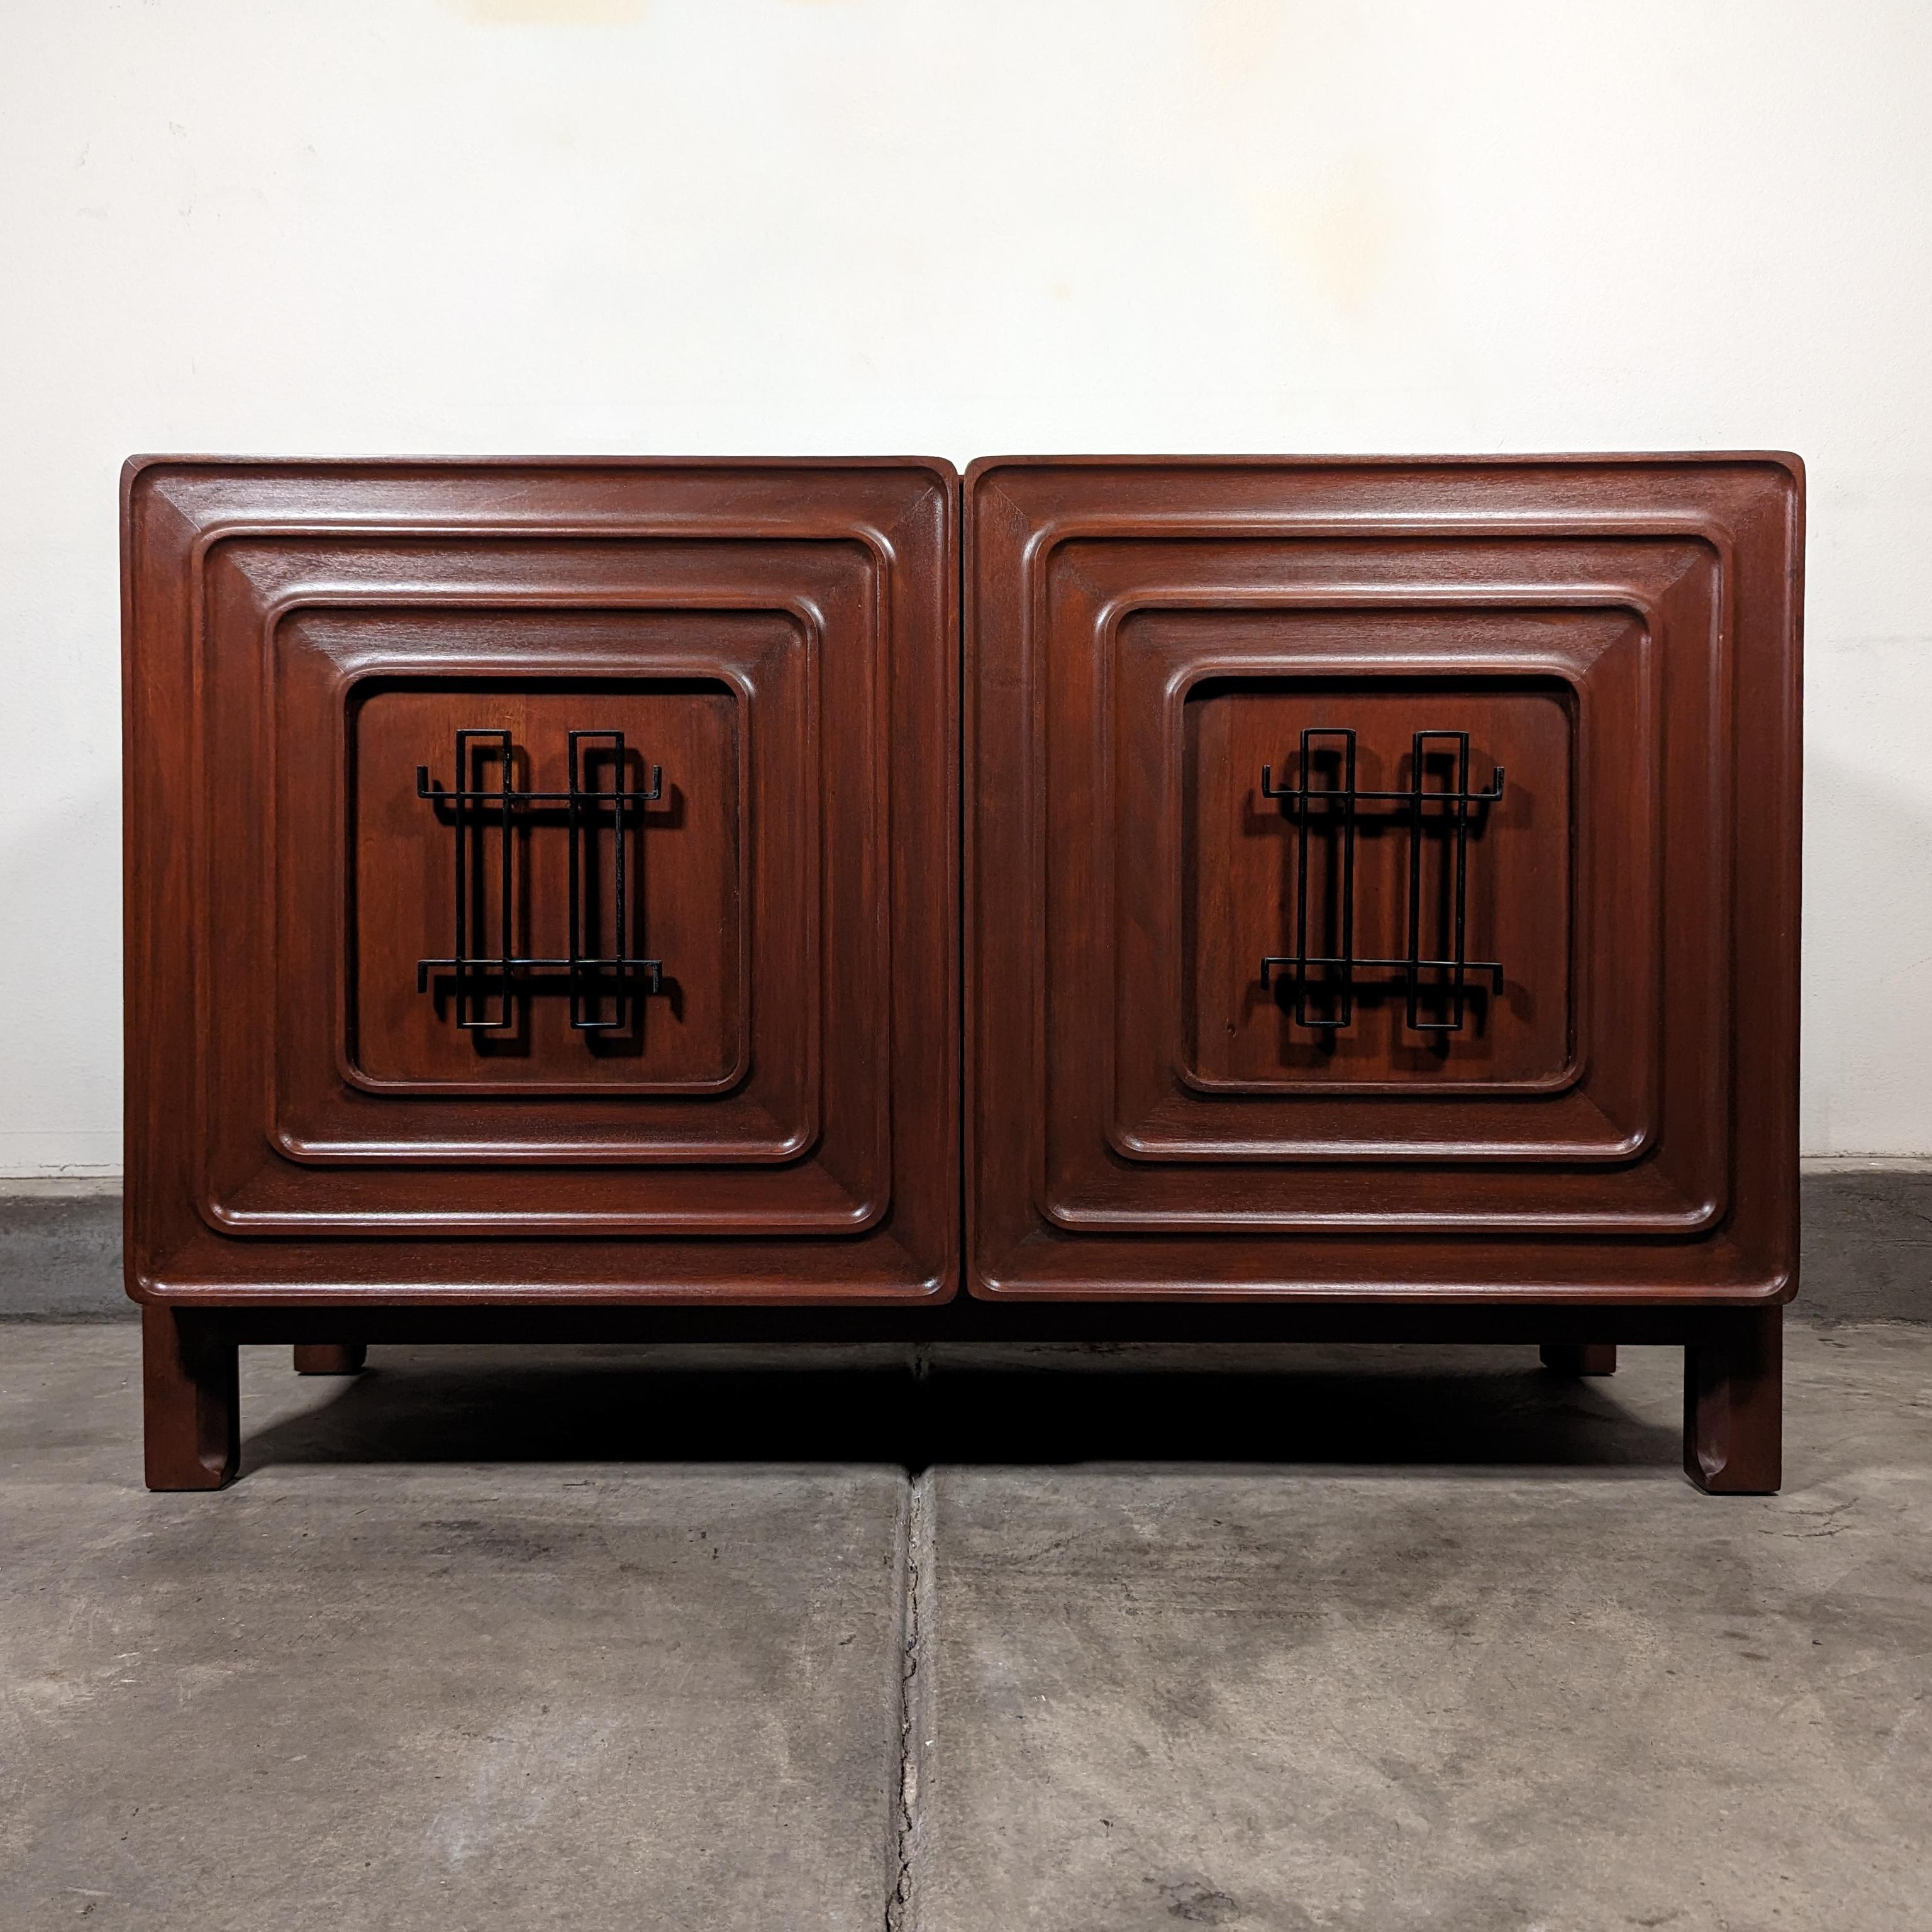 Immerse yourself in the rich history and craftsmanship of the mid-century era with this stunning cabinet, designed by the iconic Edmond J. Spence and manufactured by Industria Mueblera of Mexico in the 1950s. This versatile piece can seamlessly